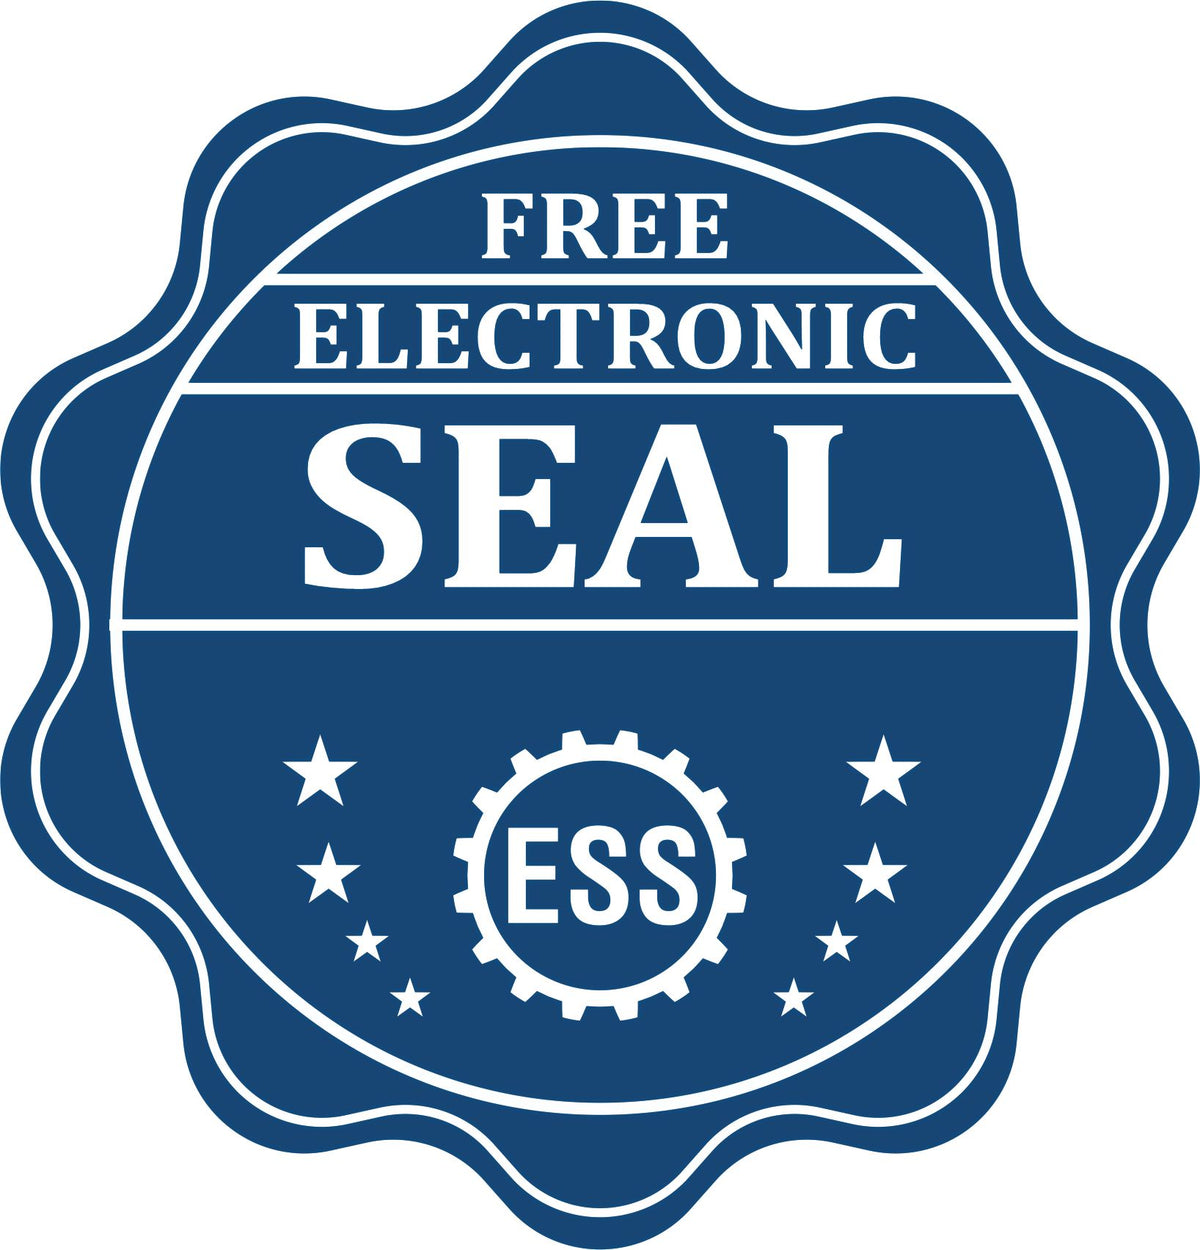 A badge showing a free electronic seal for the State of Arizona Long Reach Architectural Embossing Seal with stars and the ESS gear on the emblem.